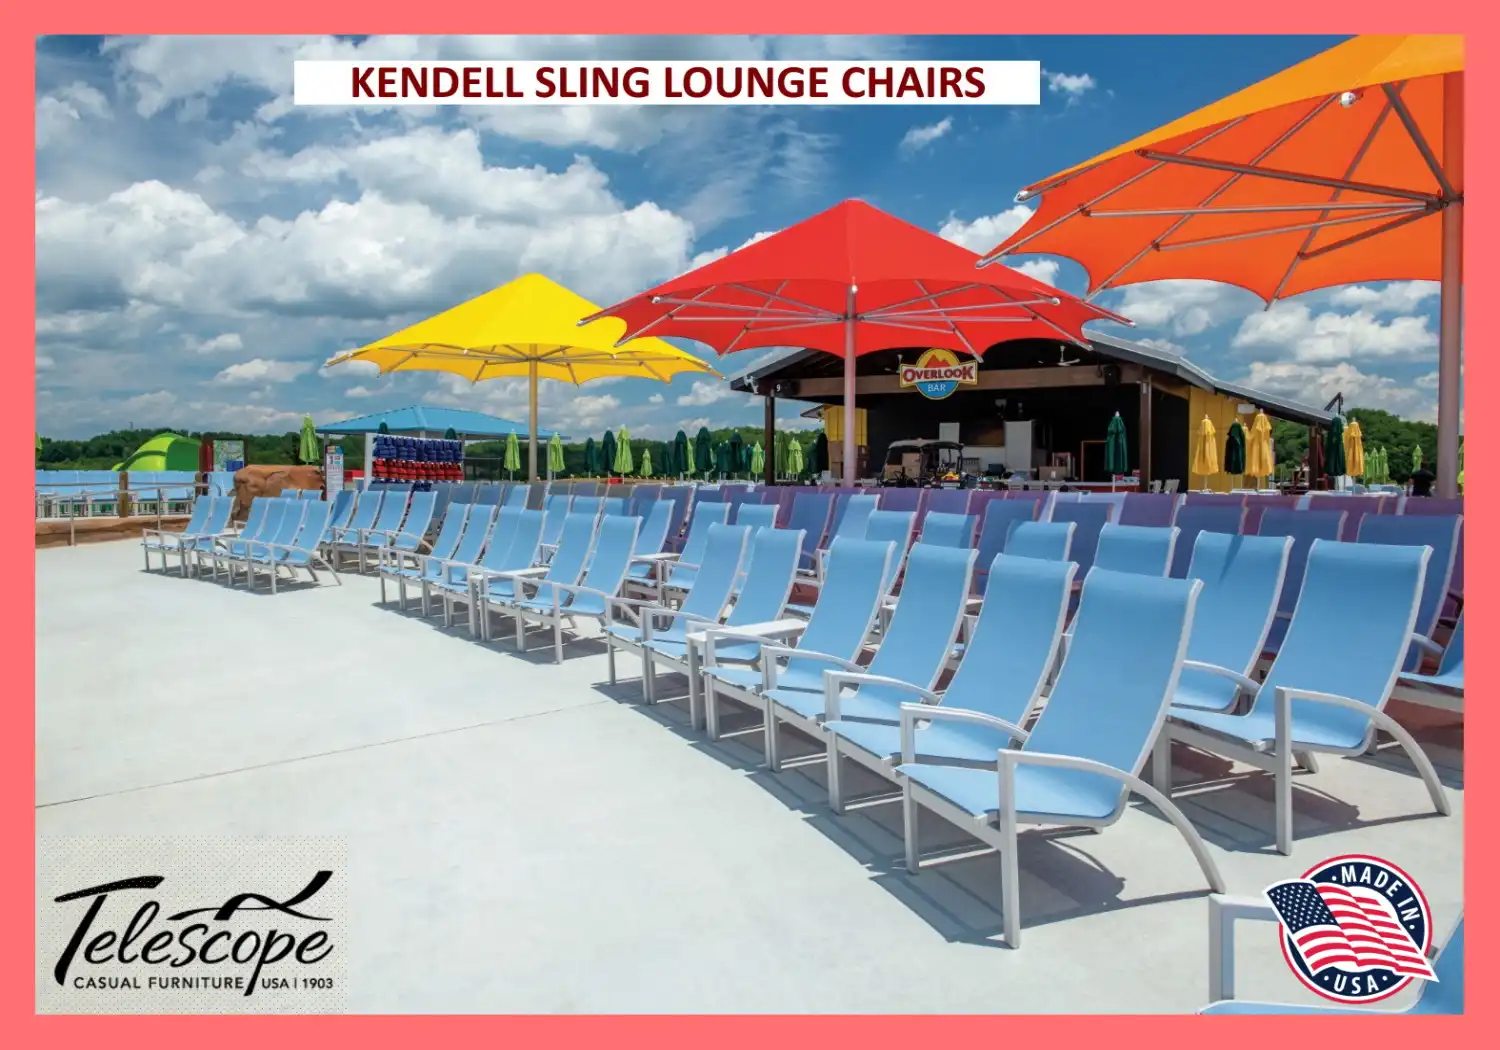 KENDELL SLING LOUNGE CHAIRS